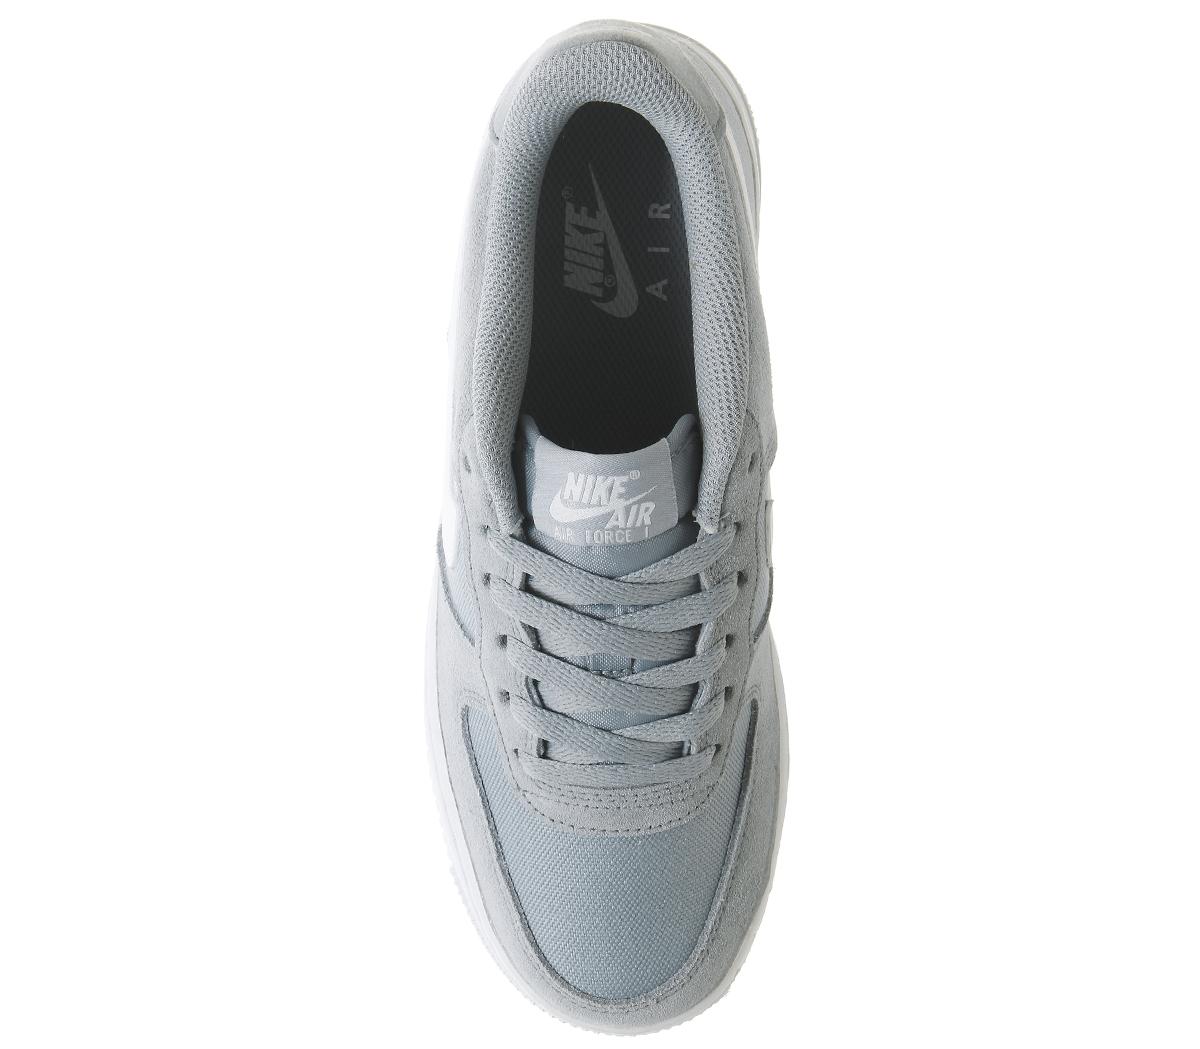 Nike Af1 Boys Trainers Obsidian Mist White - Women's Trainers